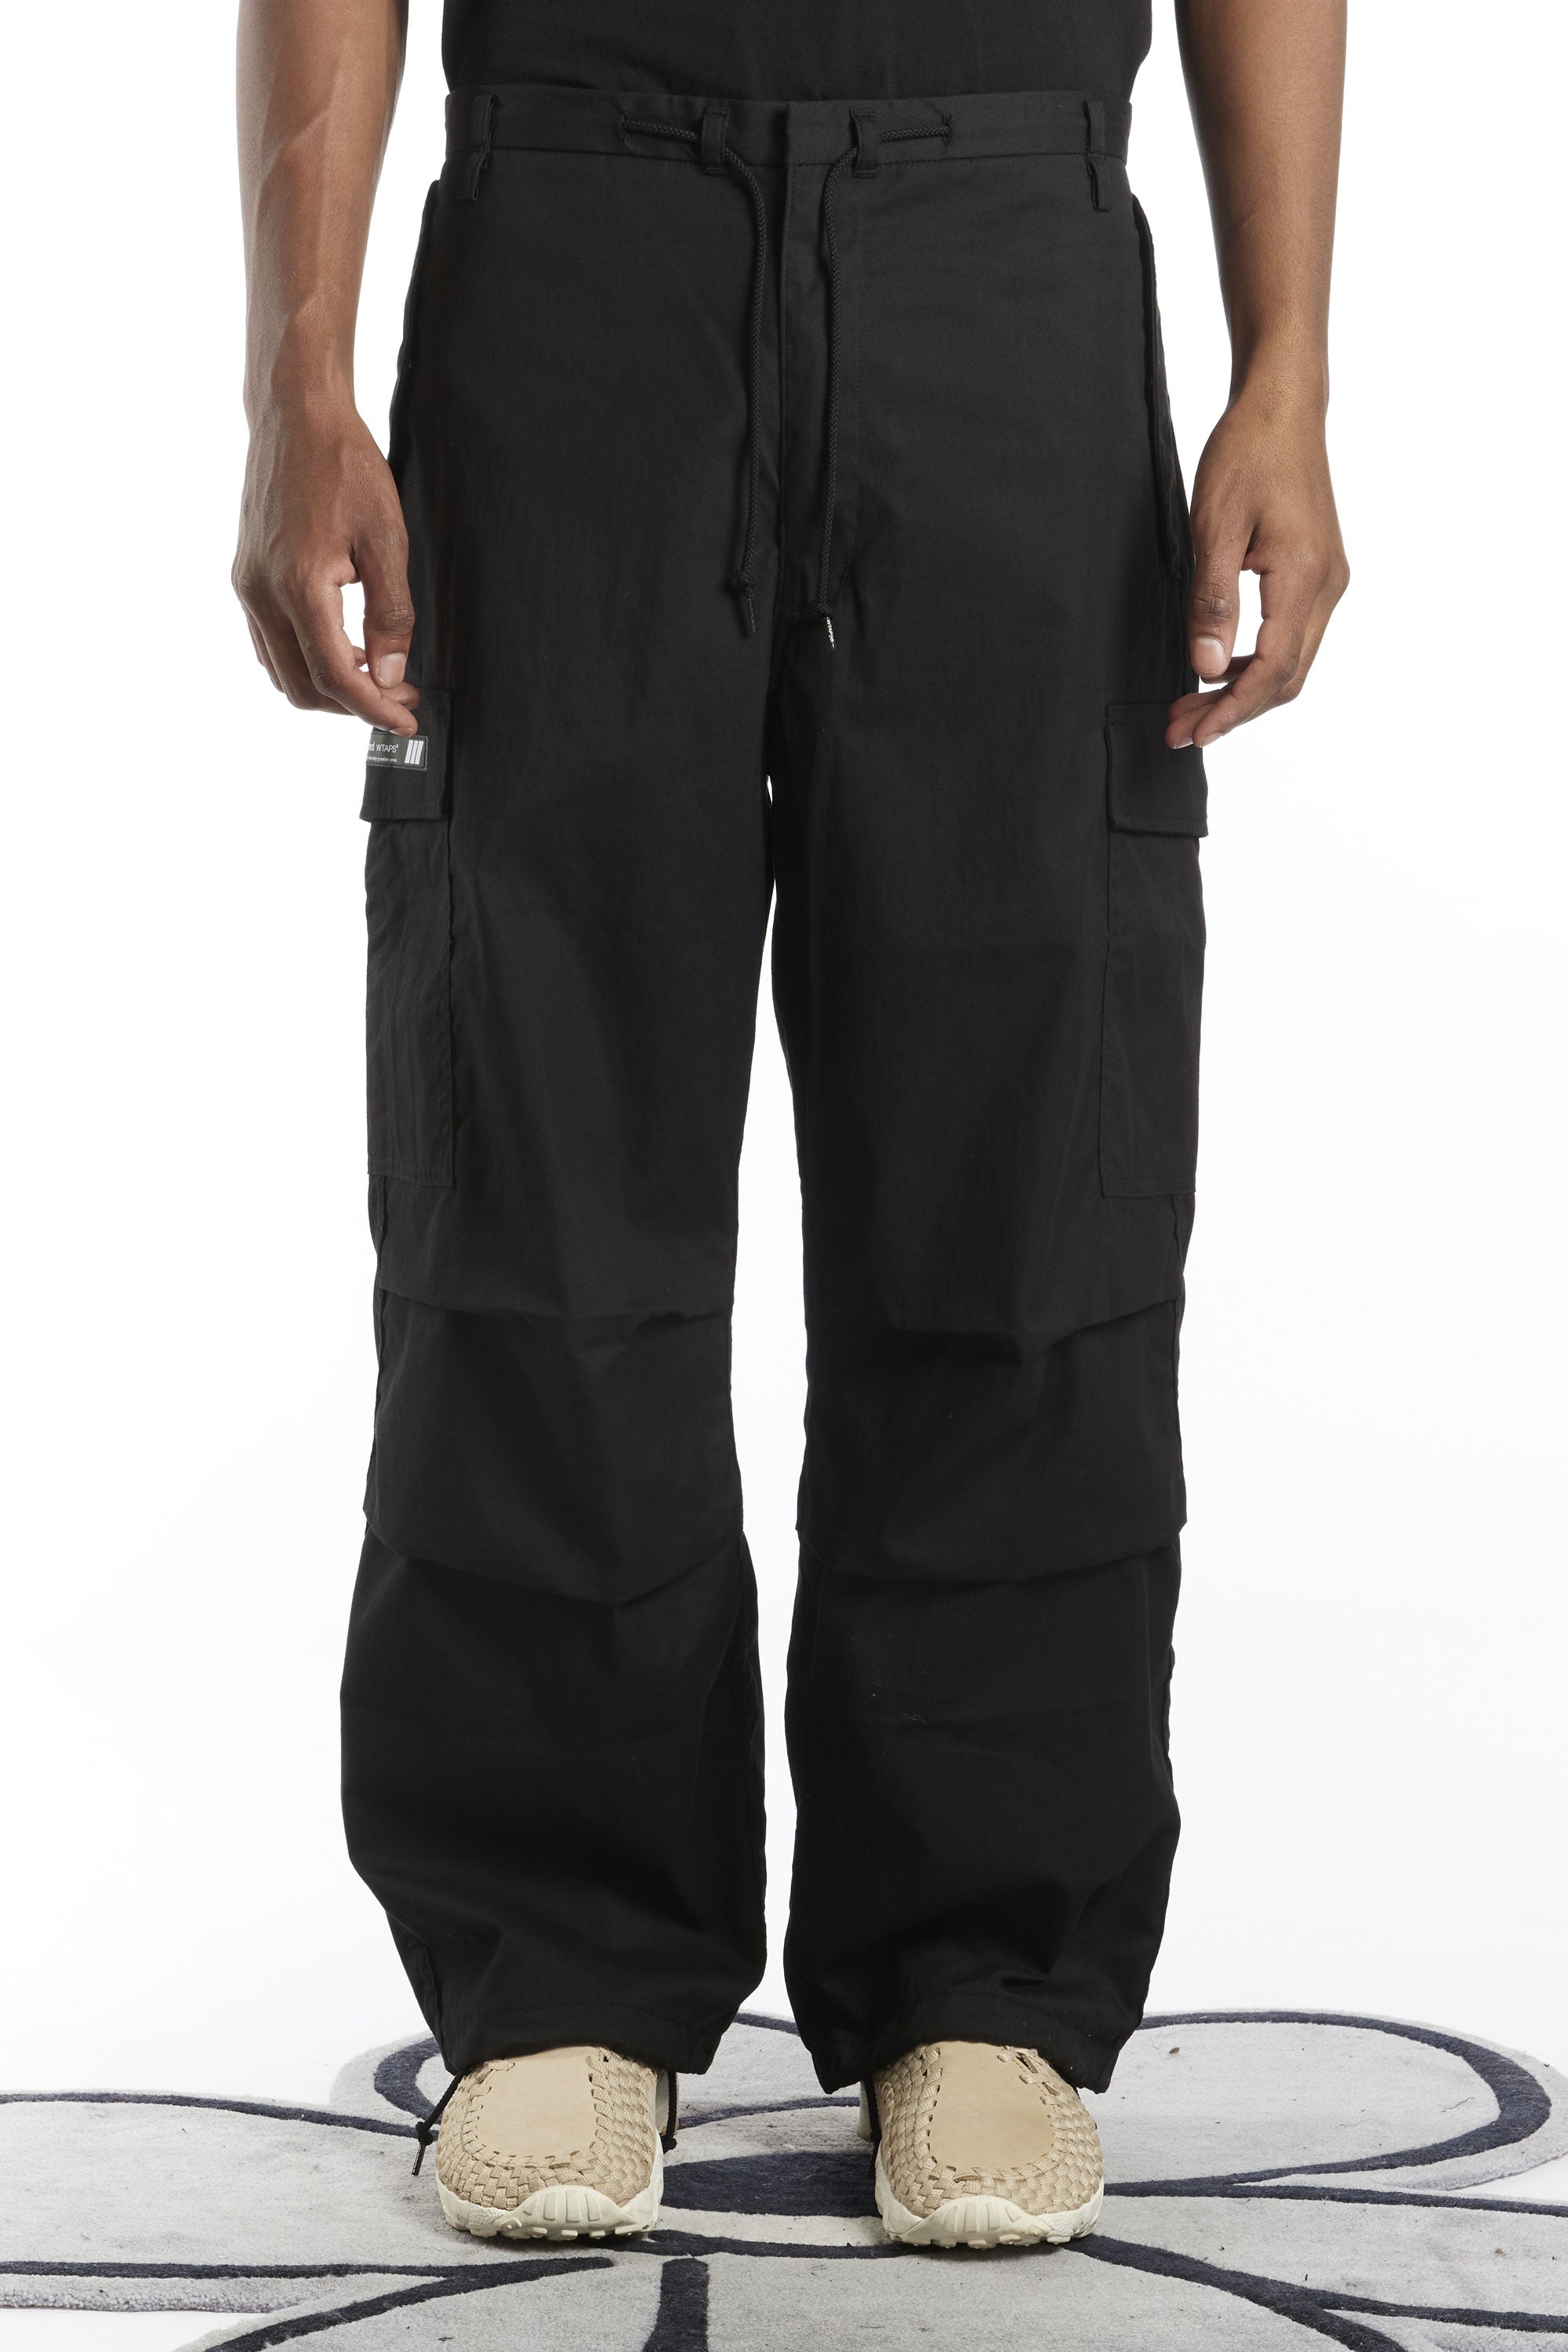 The WTAPS - MILT001 OXFORD TROUSERS BLACK available online with global shipping, and in PAM Stores Melbourne and Sydney.